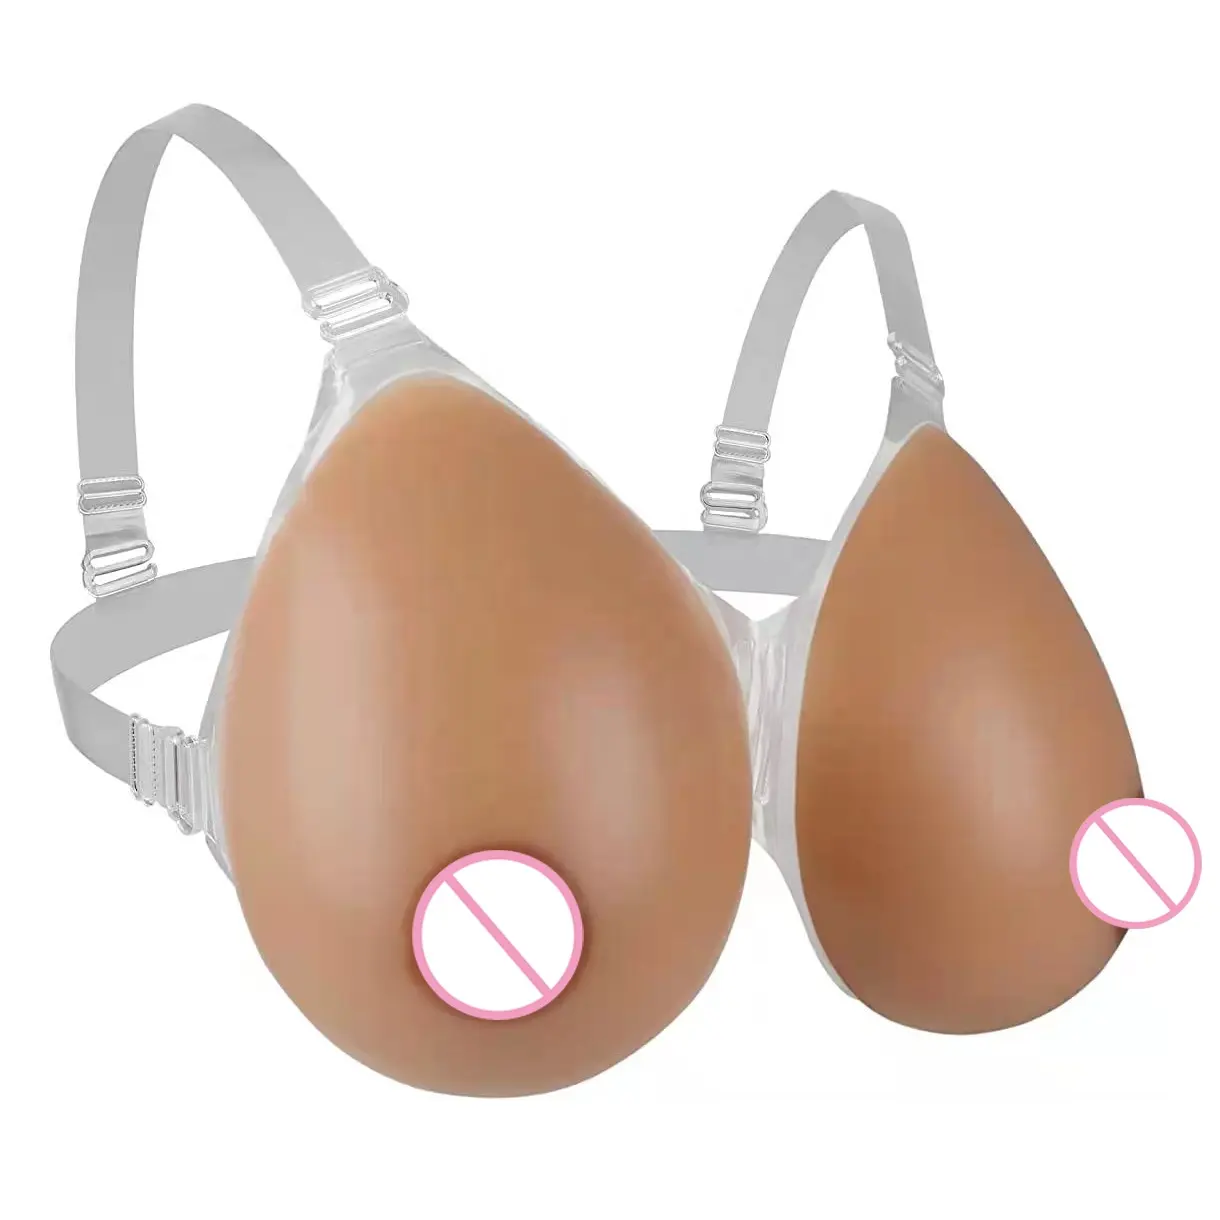 crossdressing breast forms silicone boobs for crossdressers